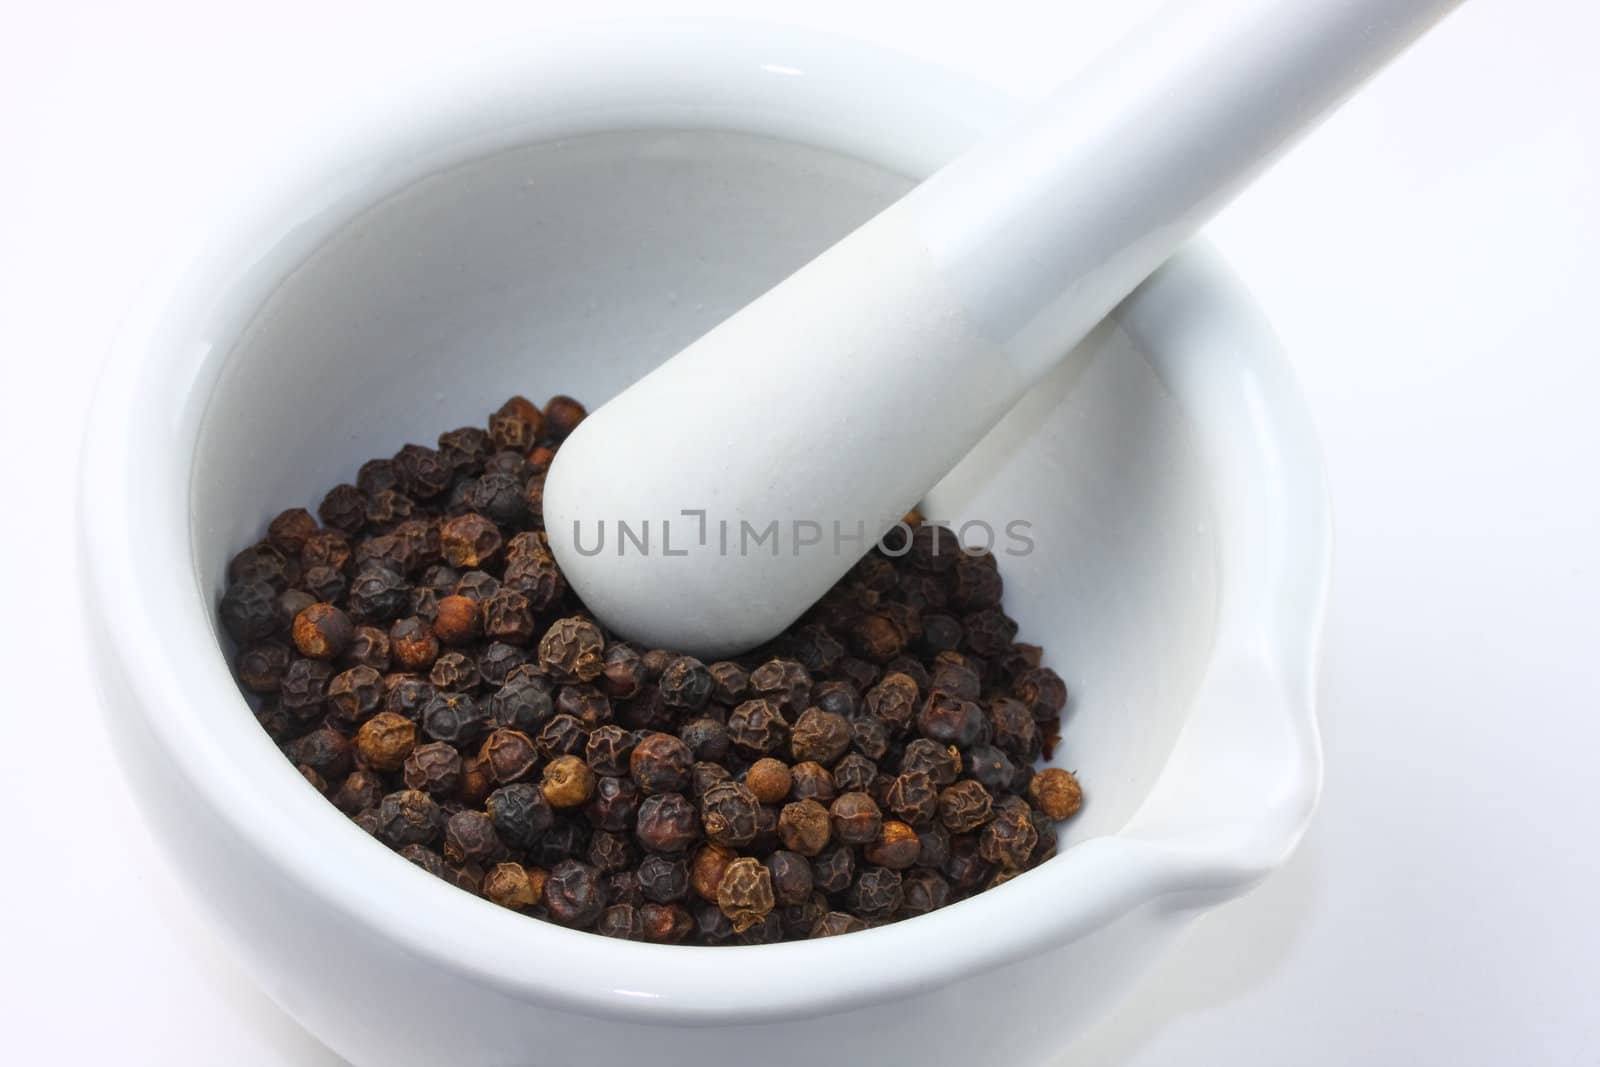 Mortar and pestle with peppercorns.